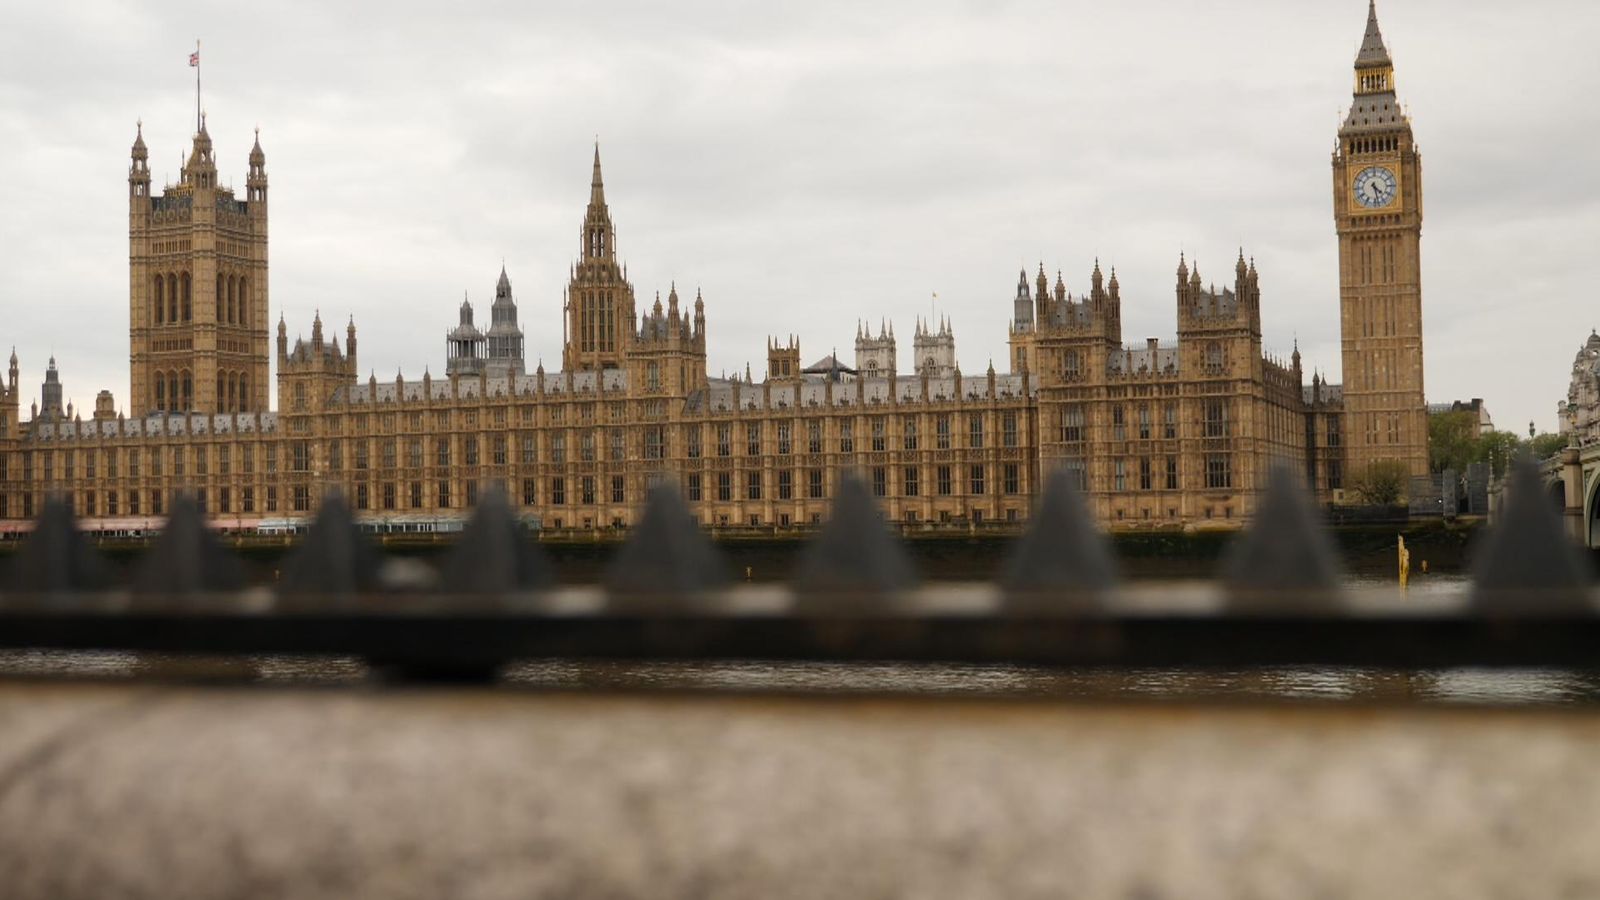 Commons approves plans to exclude from parliament MPs arrested on suspicion of serious offence